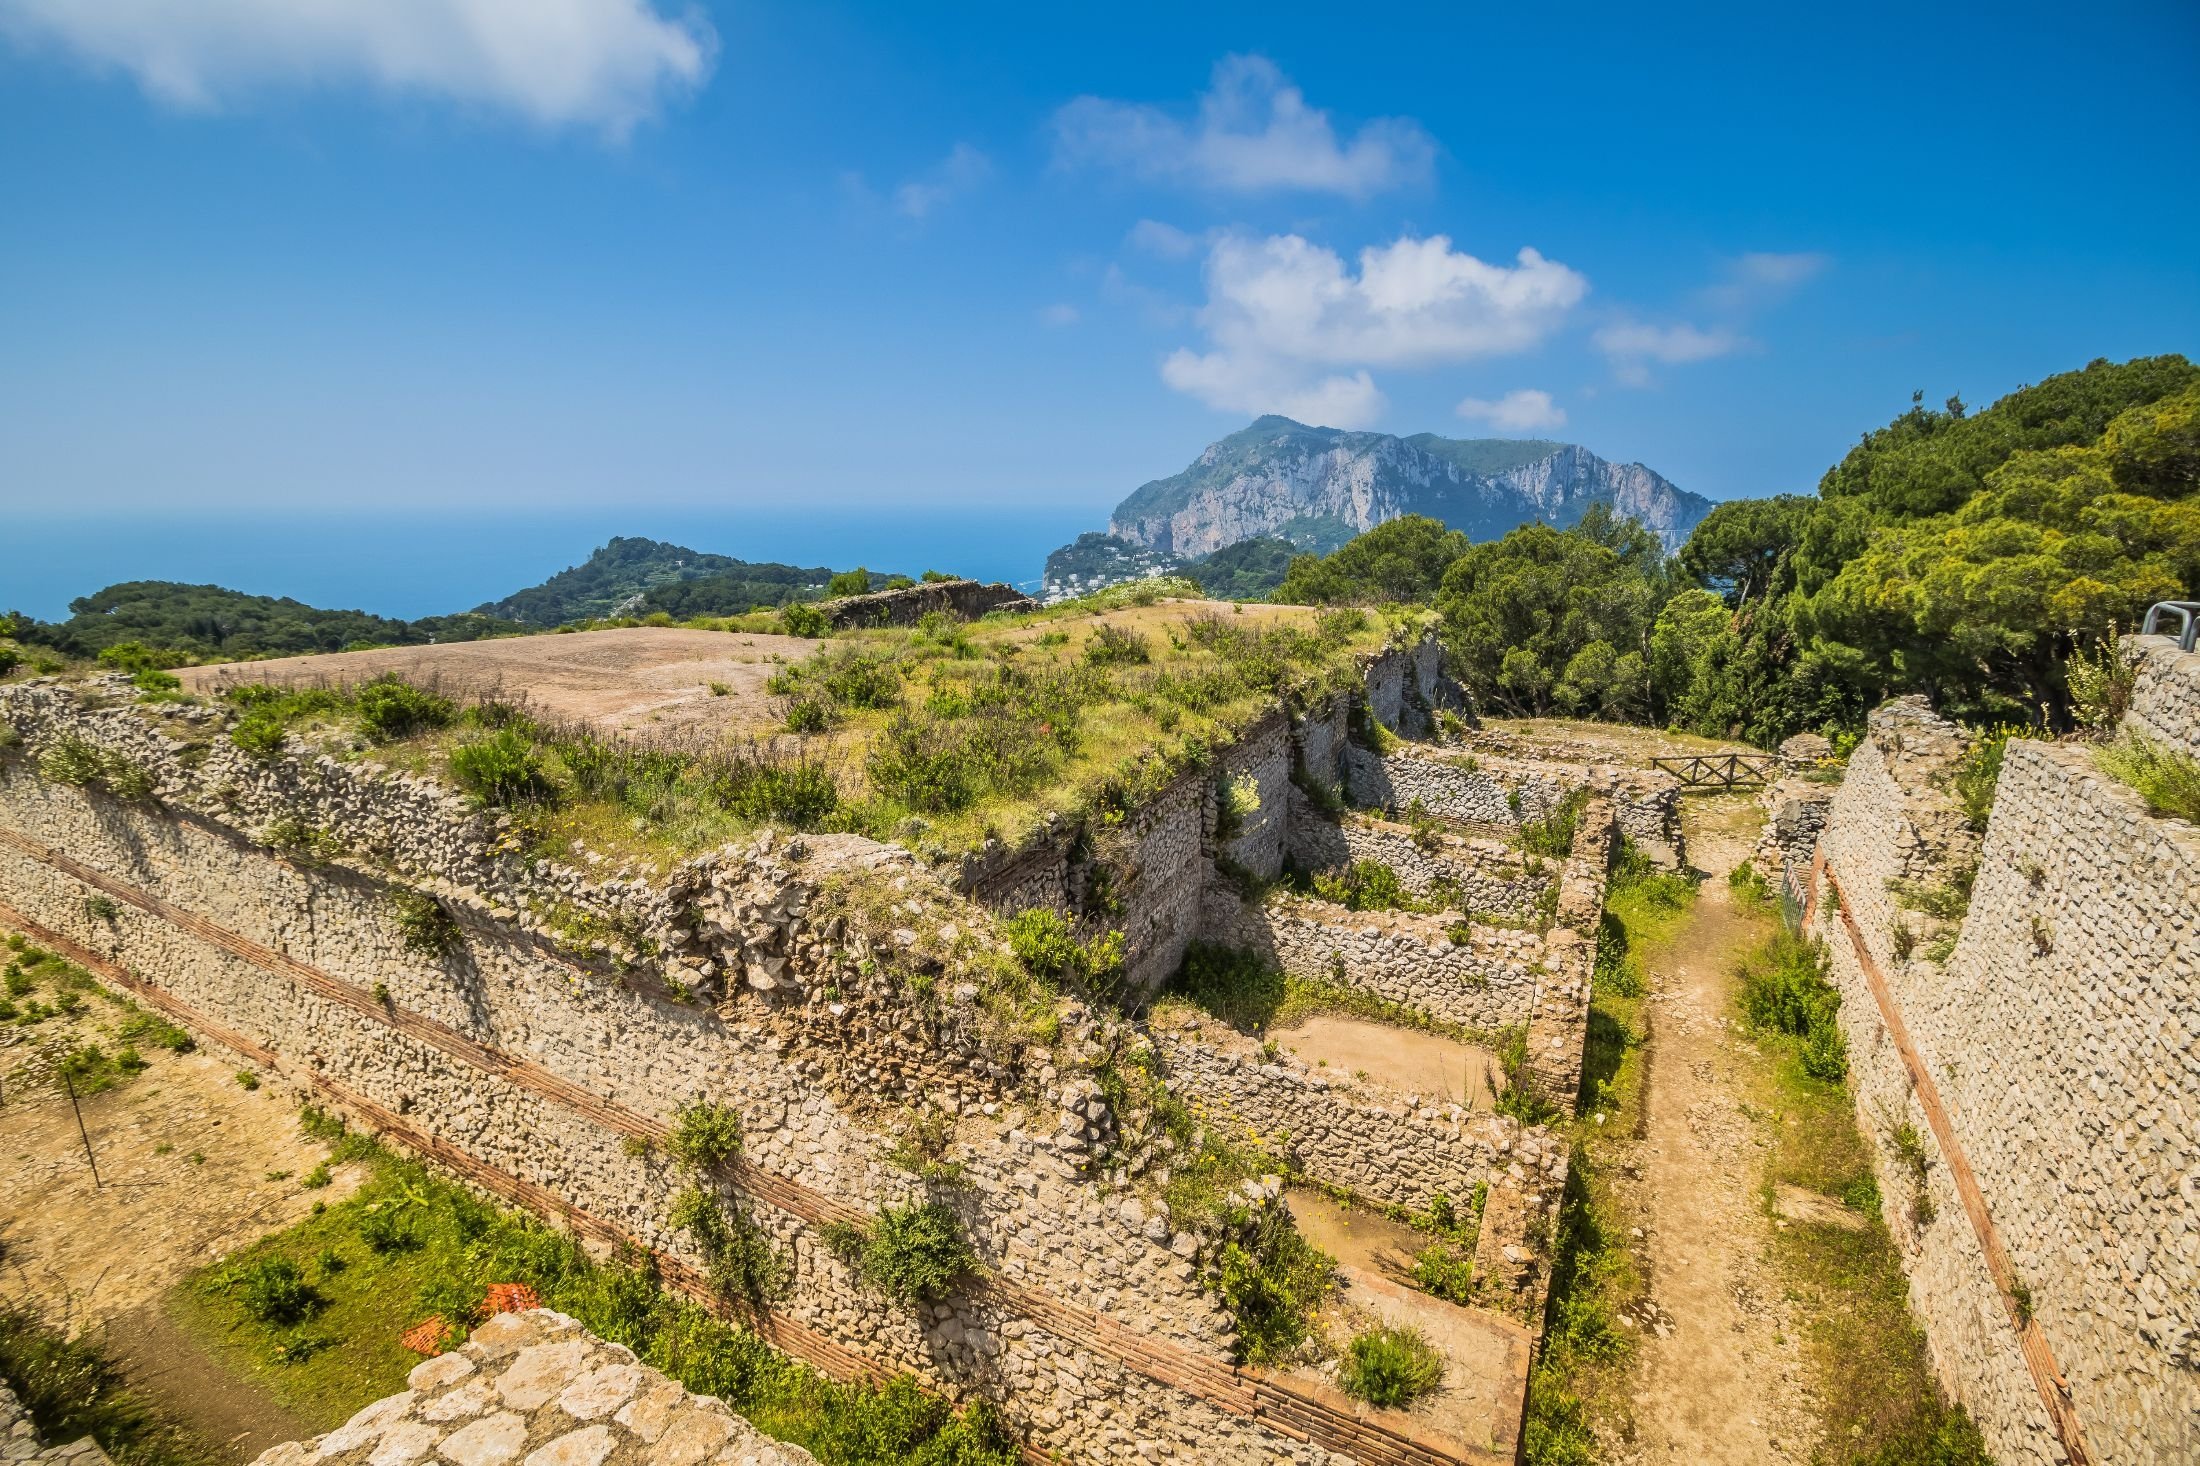 The famous Villa Jovis can be seen on the island of Capri, Italy. (Shutterstock Photo)